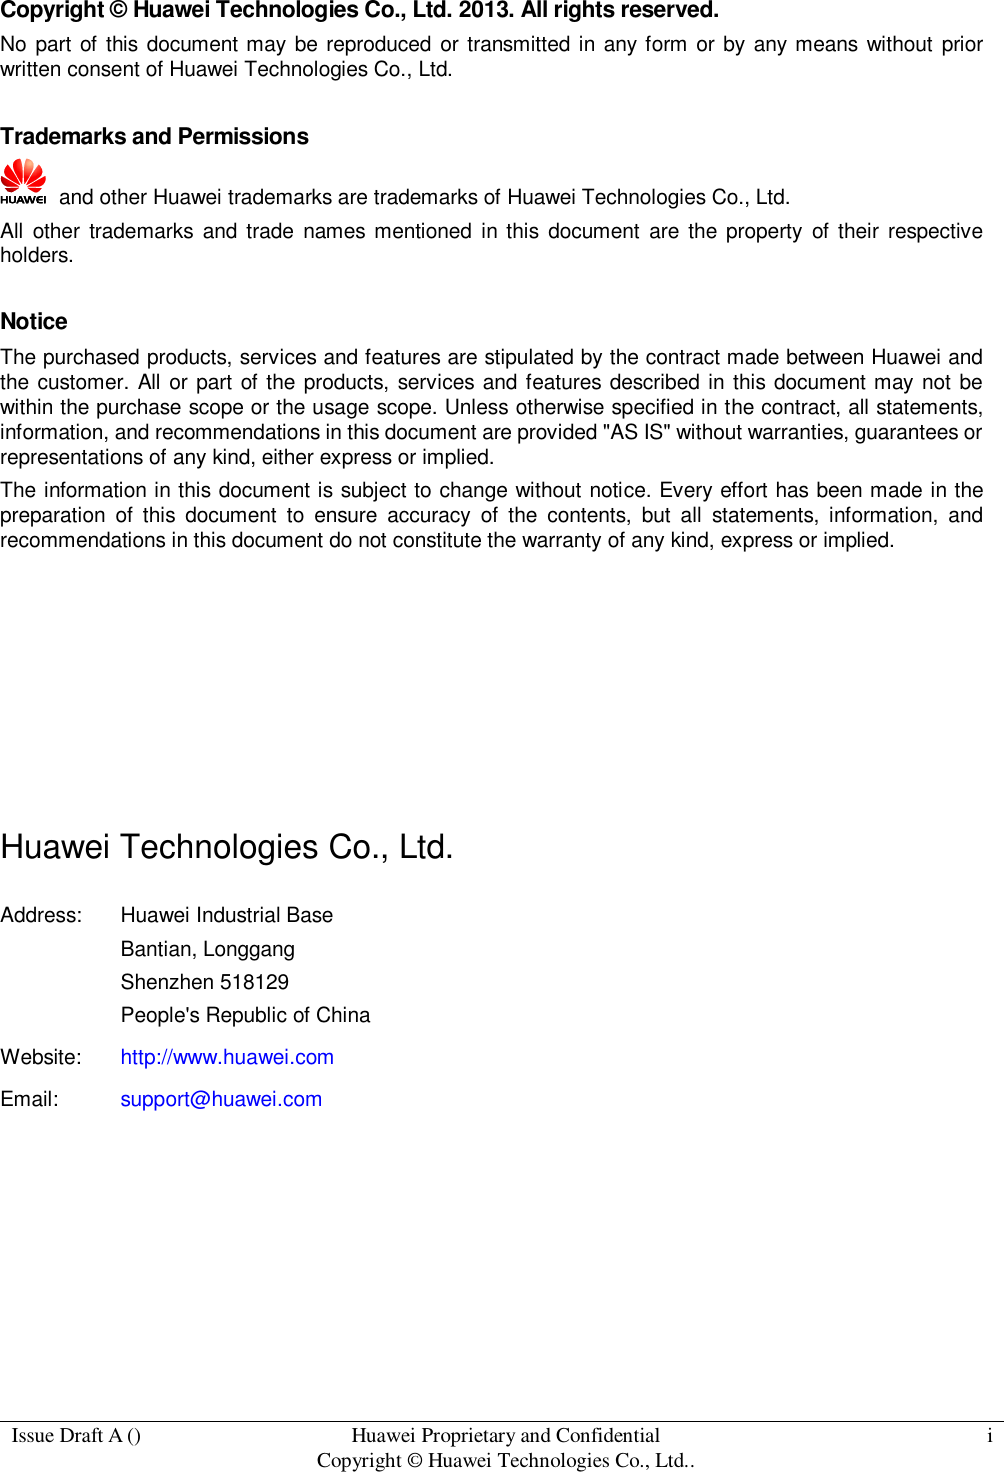  Issue Draft A () Huawei Proprietary and Confidential                                     Copyright © Huawei Technologies Co., Ltd.. i  Copyright © Huawei Technologies Co., Ltd. 2013. All rights reserved. No part  of this document may be reproduced  or  transmitted in any form  or  by  any means  without prior written consent of Huawei Technologies Co., Ltd.  Trademarks and Permissions   and other Huawei trademarks are trademarks of Huawei Technologies Co., Ltd. All  other  trademarks and trade  names  mentioned  in this  document  are the  property  of their  respective holders.  Notice The purchased products, services and features are stipulated by the contract made between Huawei and the customer. All or part of the products, services and features described in this document may not be within the purchase scope or the usage scope. Unless otherwise specified in the contract, all statements, information, and recommendations in this document are provided &quot;AS IS&quot; without warranties, guarantees or representations of any kind, either express or implied. The information in this document is subject to change without notice. Every effort has been made in the preparation  of  this  document  to  ensure  accuracy  of  the  contents,  but  all  statements,  information,  and recommendations in this document do not constitute the warranty of any kind, express or implied.       Huawei Technologies Co., Ltd. Address: Huawei Industrial Base Bantian, Longgang Shenzhen 518129 People&apos;s Republic of China Website: http://www.huawei.com Email: support@huawei.com        